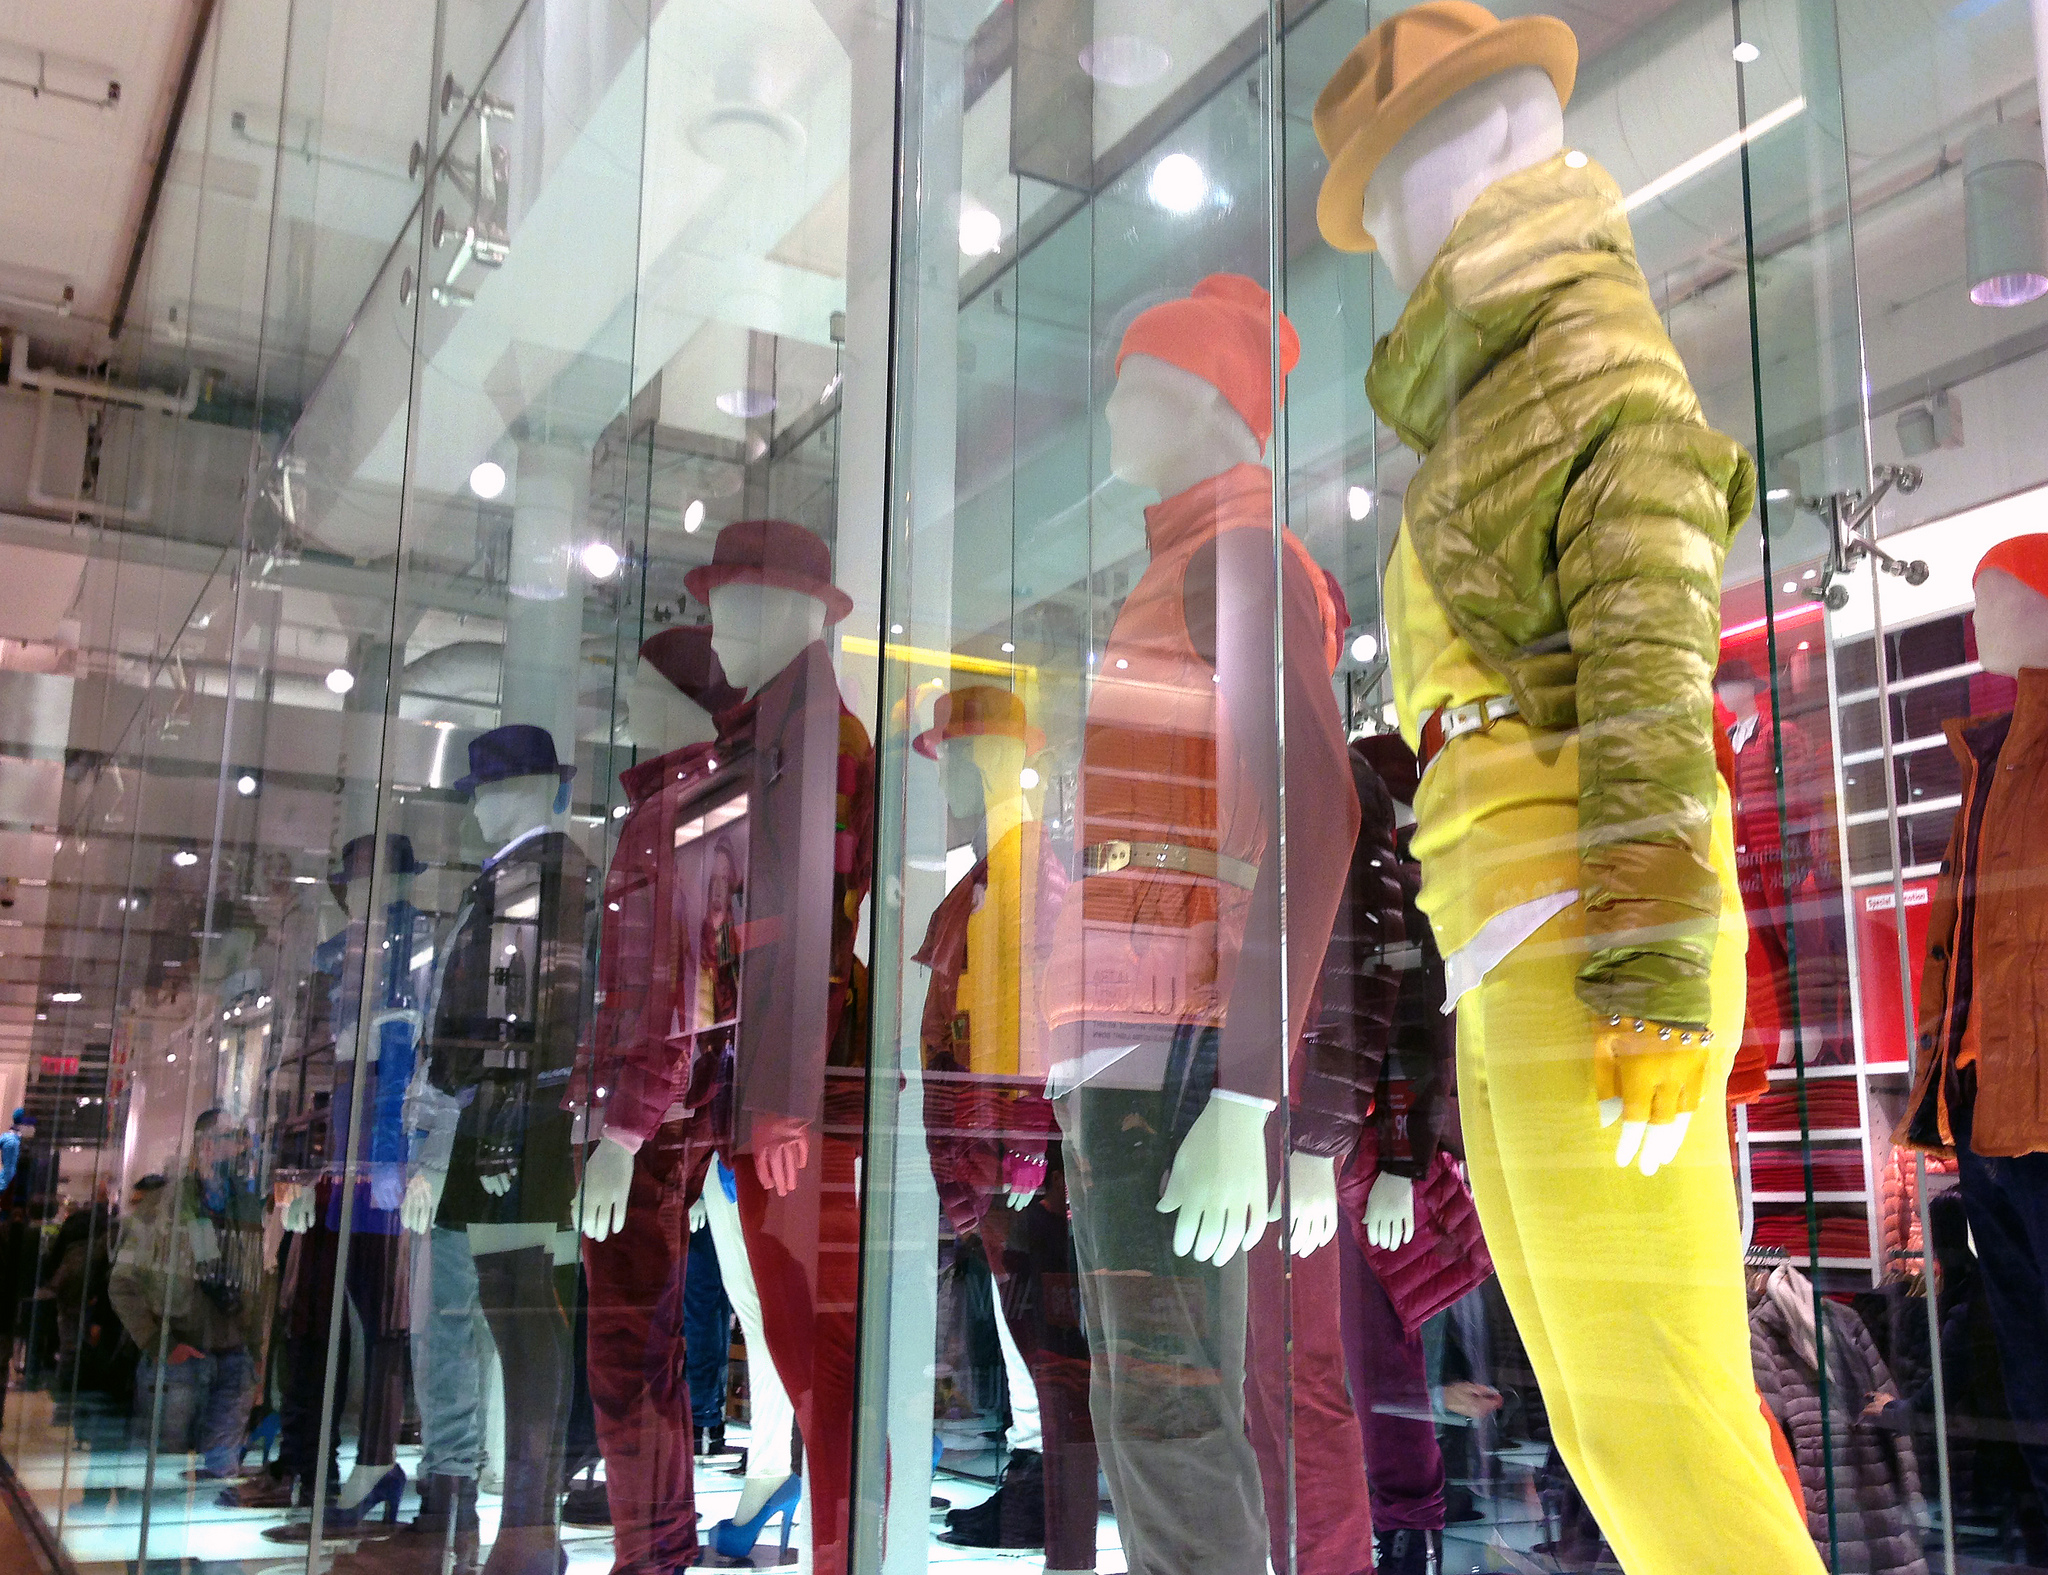 Display at Uniqlo in New York. 